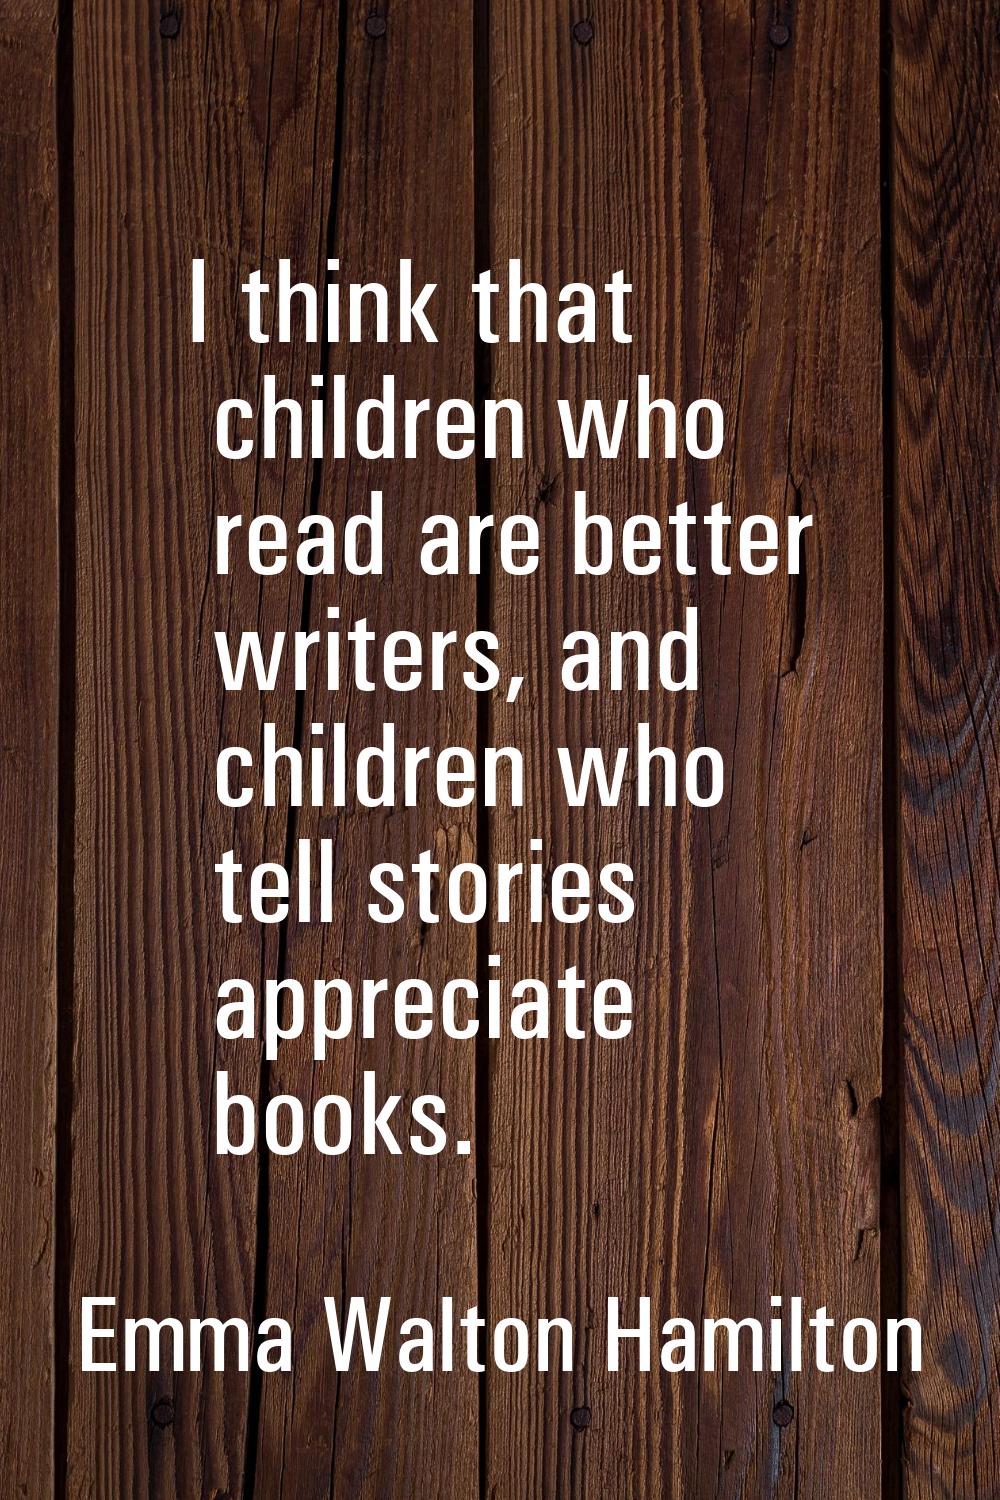 I think that children who read are better writers, and children who tell stories appreciate books.